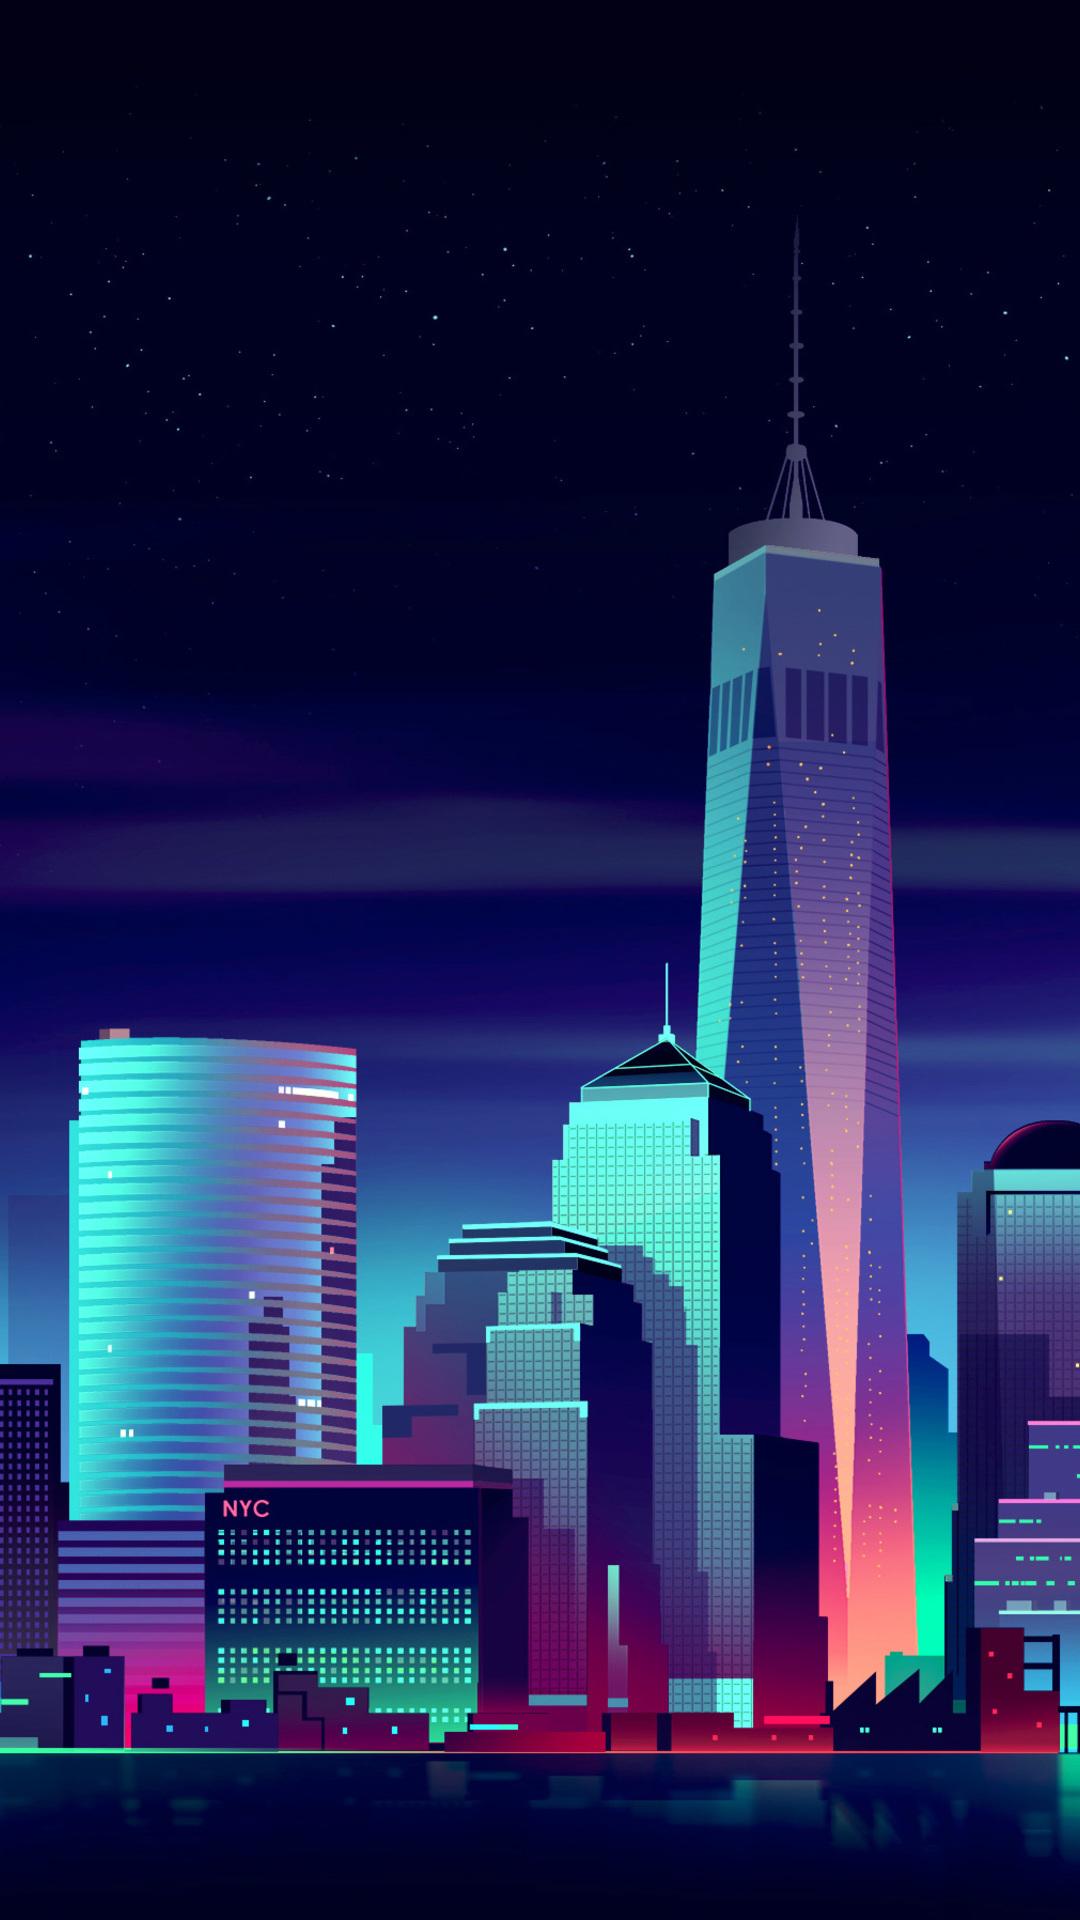 Any other pixel city night wallpaper like this one for phones?